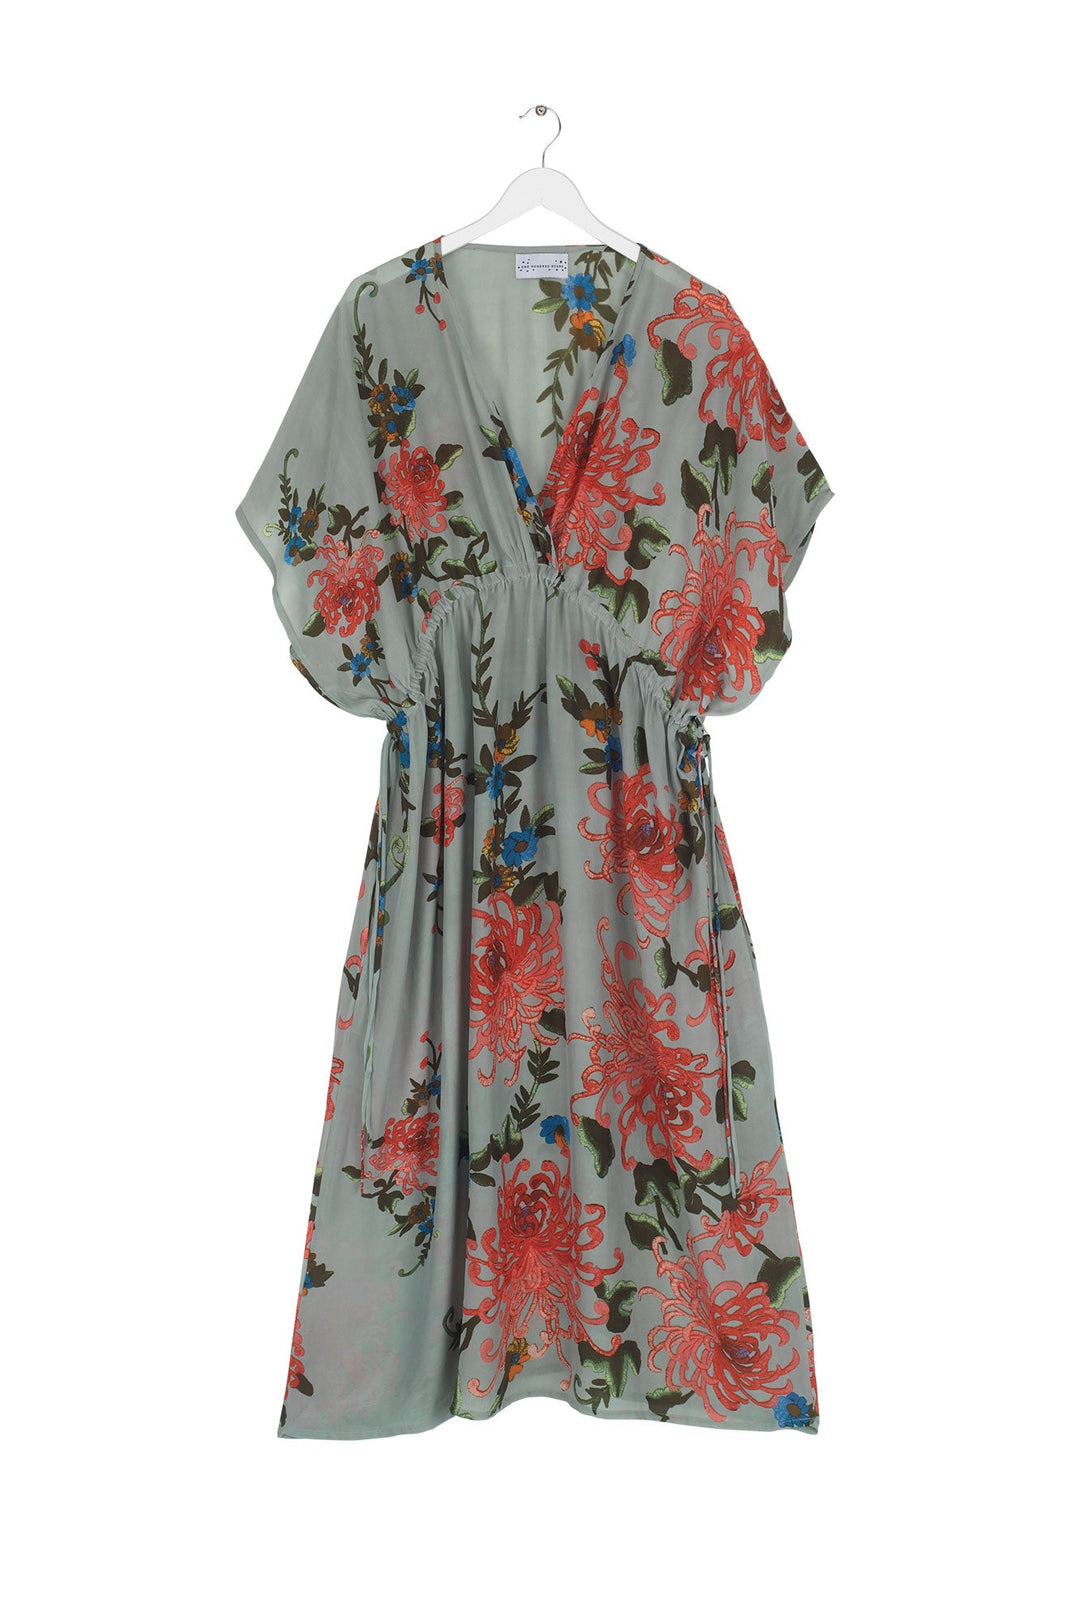 Women's lightweight  beach cover up dress with tie waist in aqua with chrysanthemum print by One Hundred Stars